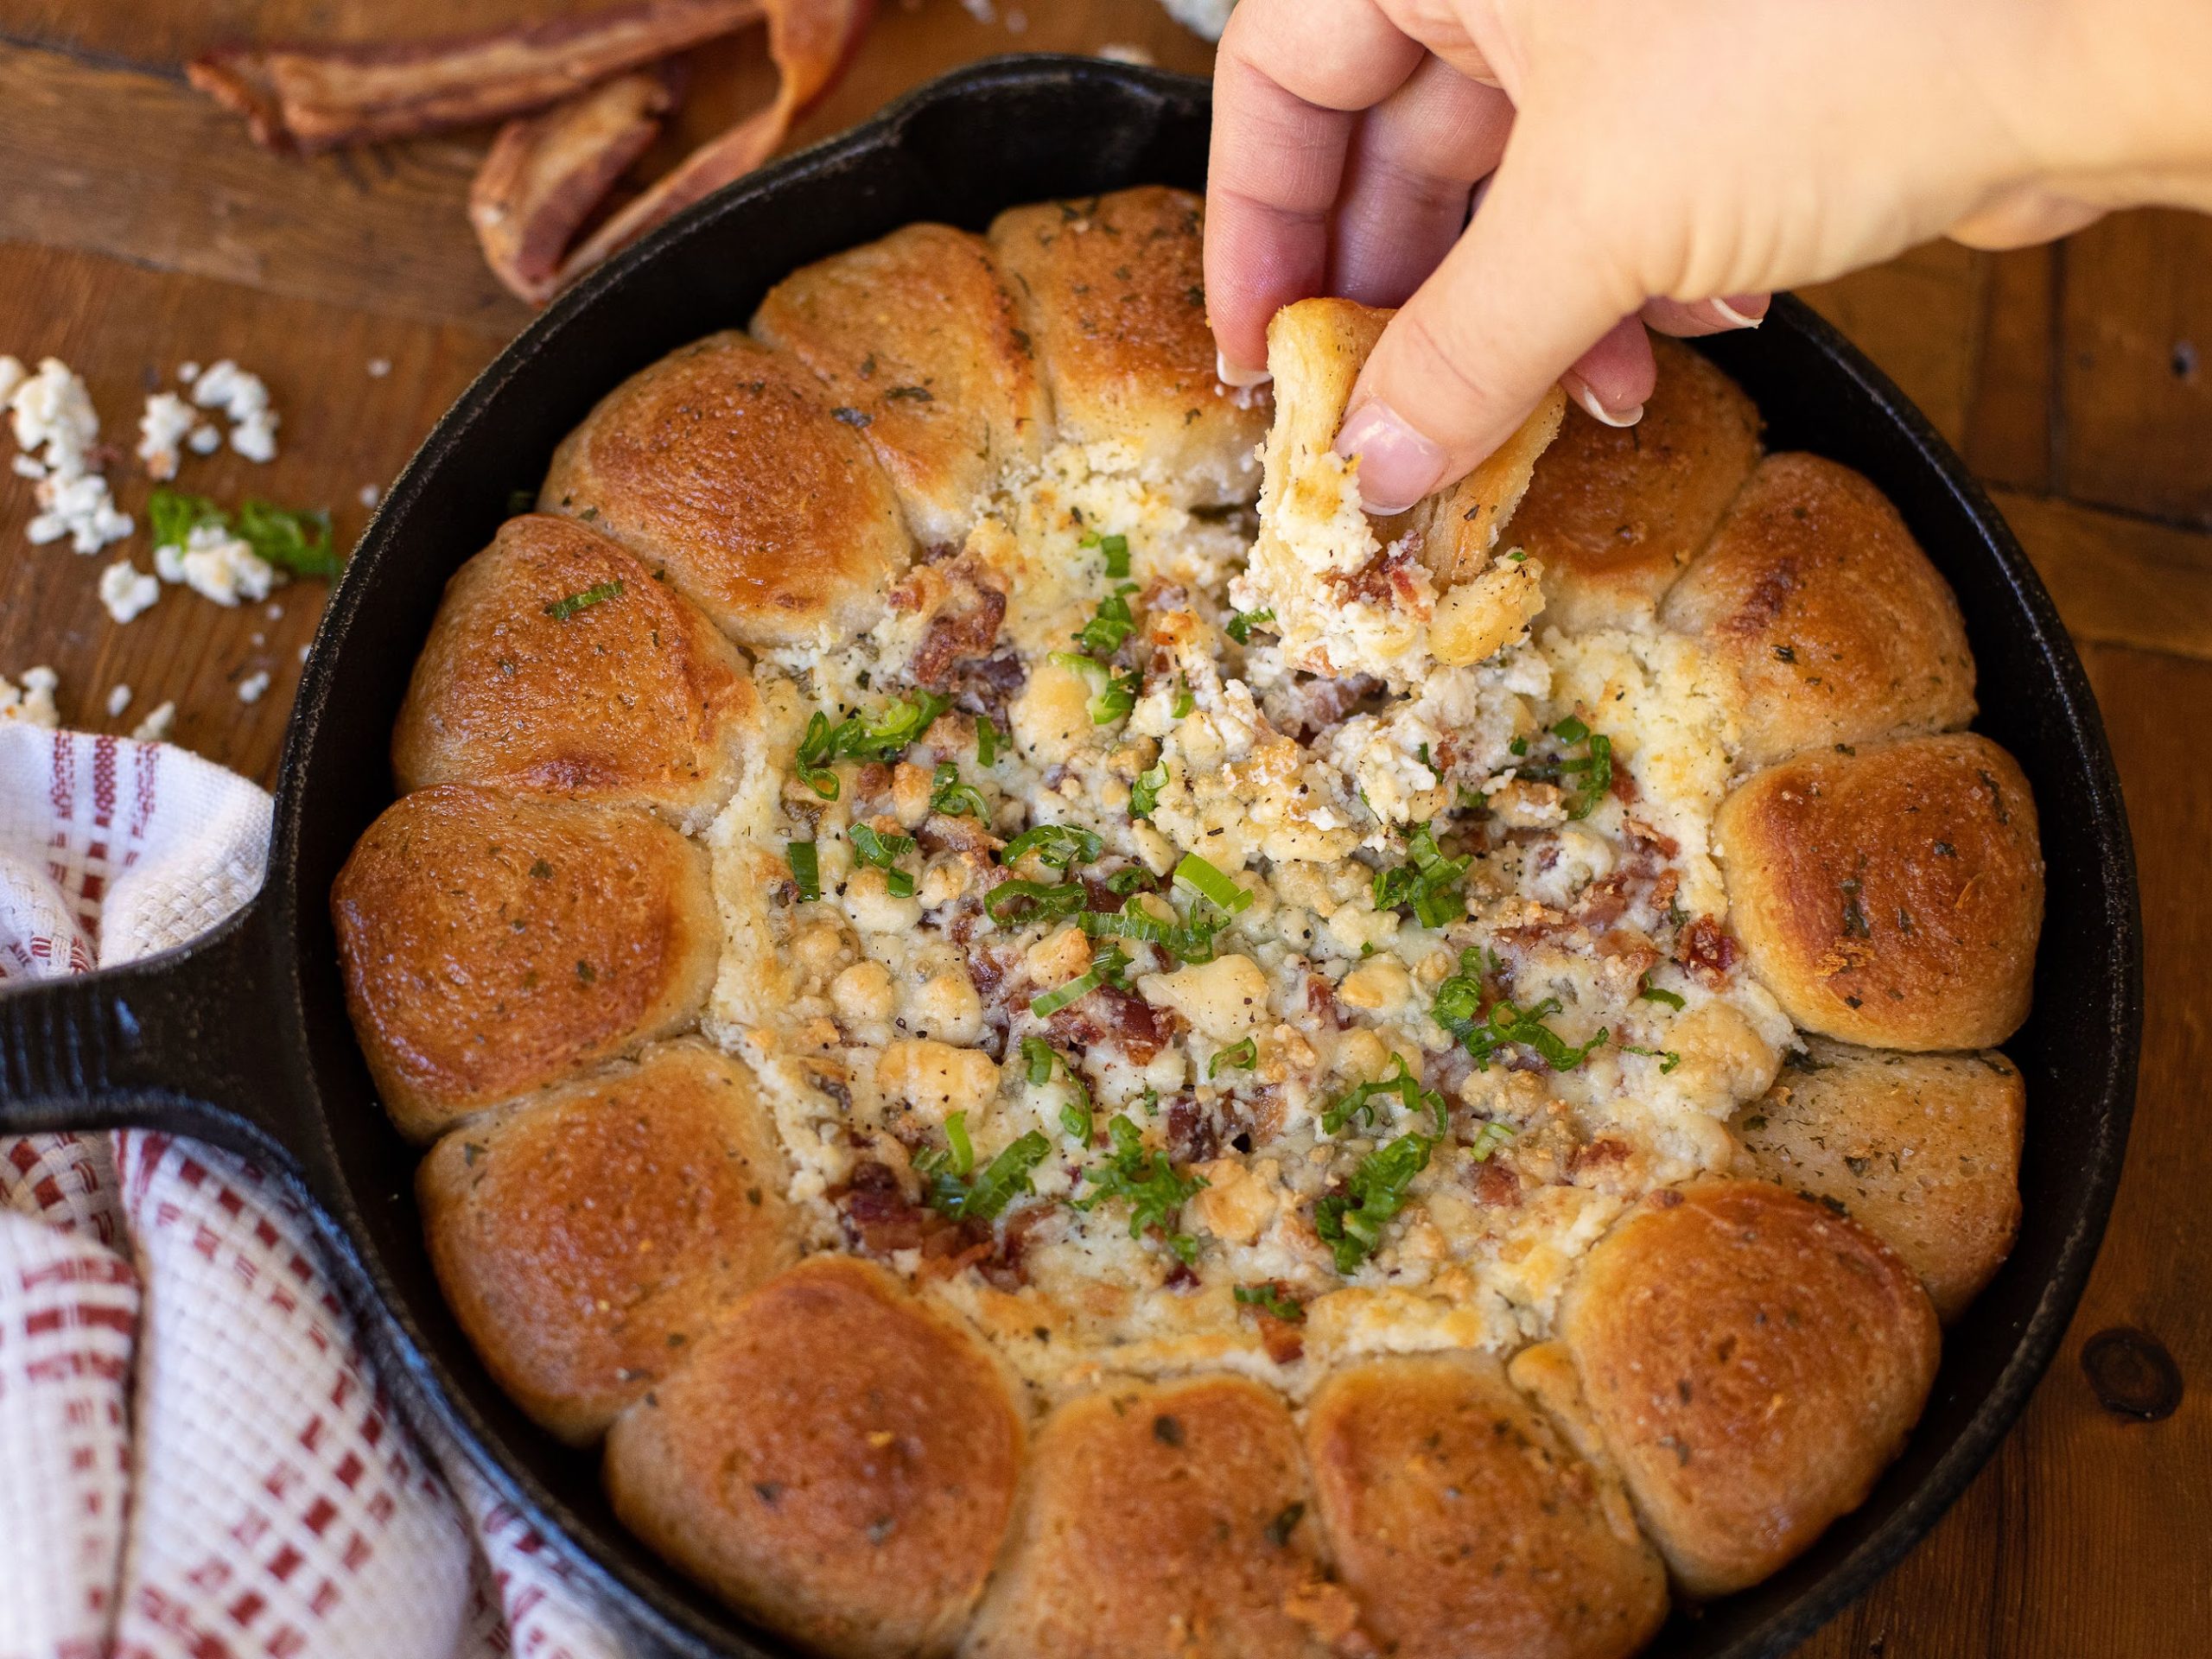 Grab A Deal On Hatfield Bacon & Serve Up Bacon Gorgonzola Skillet Dip At Your Next Holiday Gathering! on I Heart Publix 1